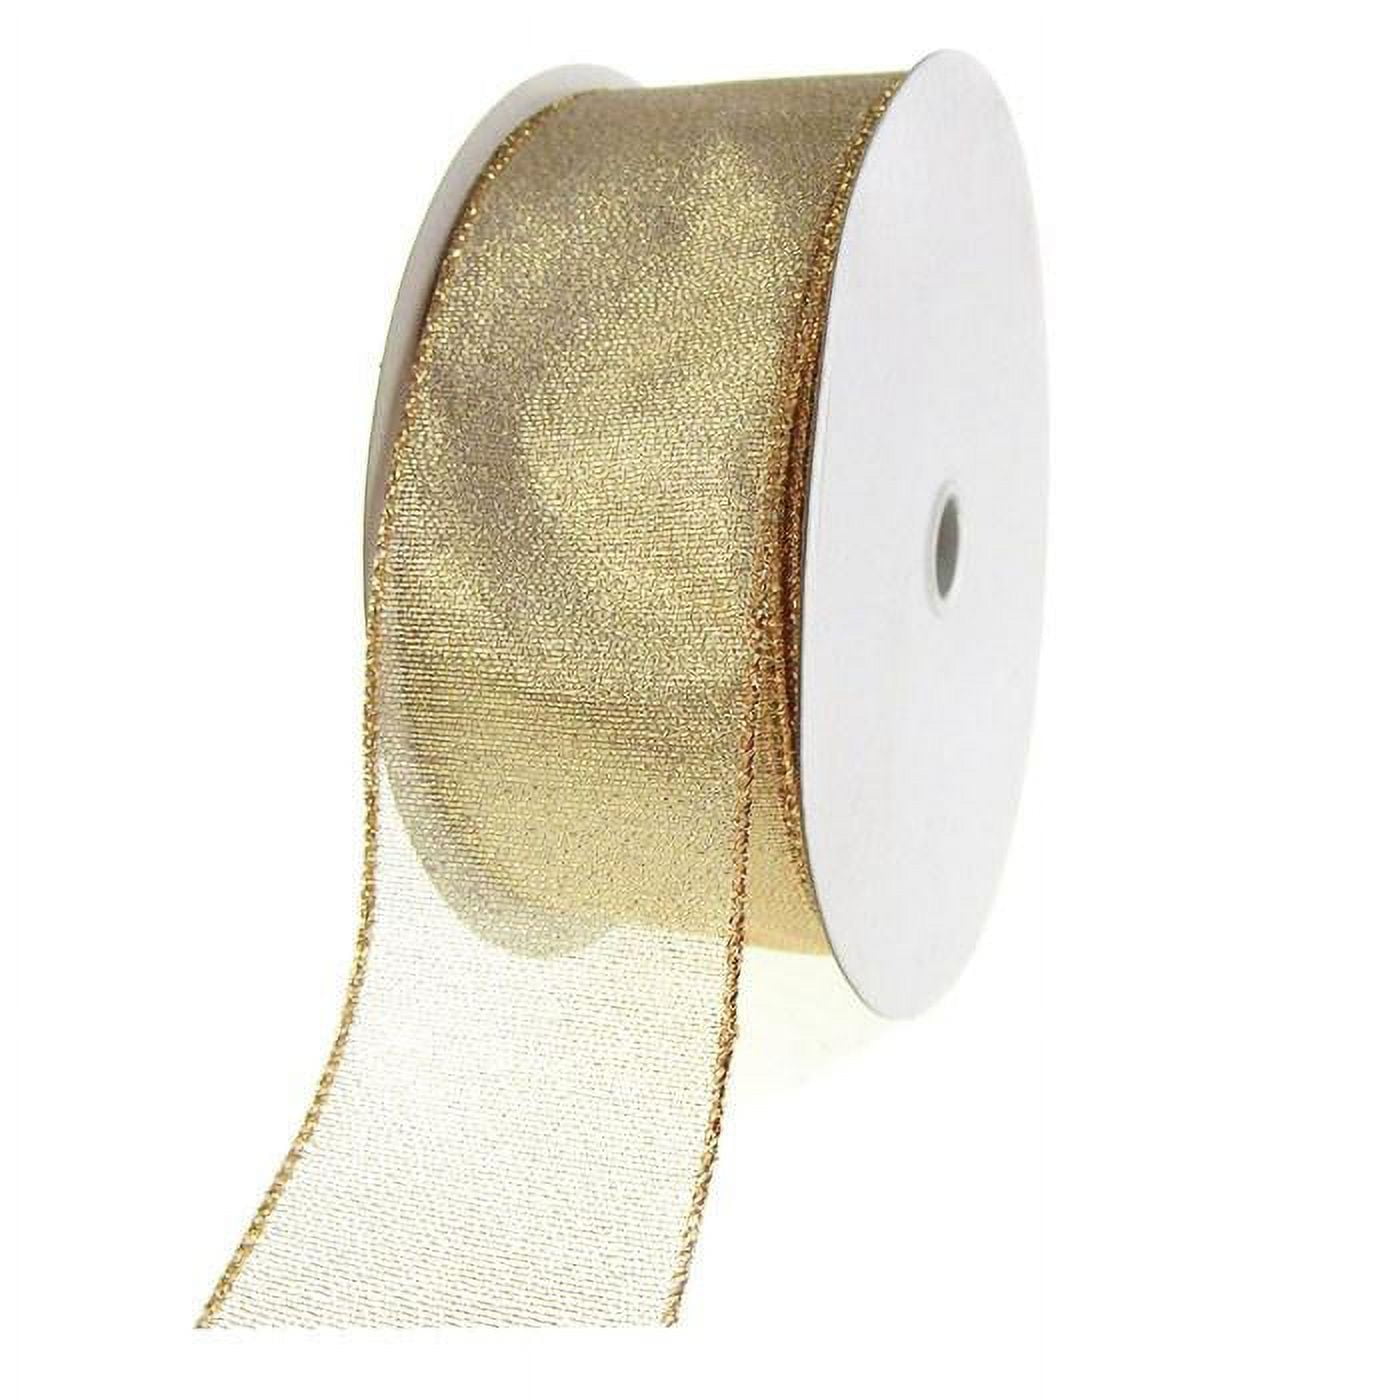 Wired Lustrous Gold or Silver Ribbon, 2 1/2 inch width